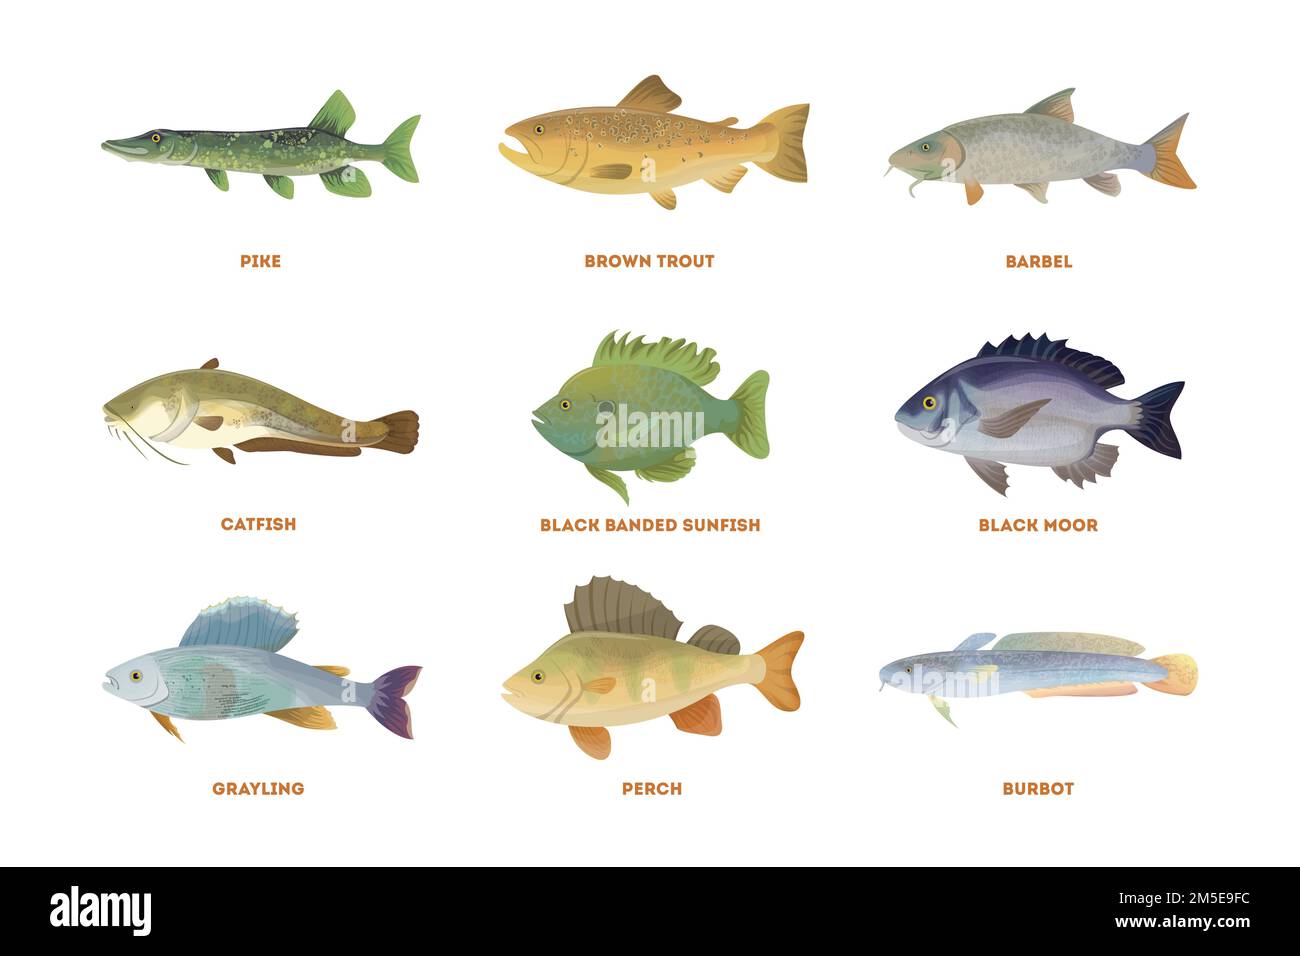 River fish set. Isolated fish on white background. Stock Vector